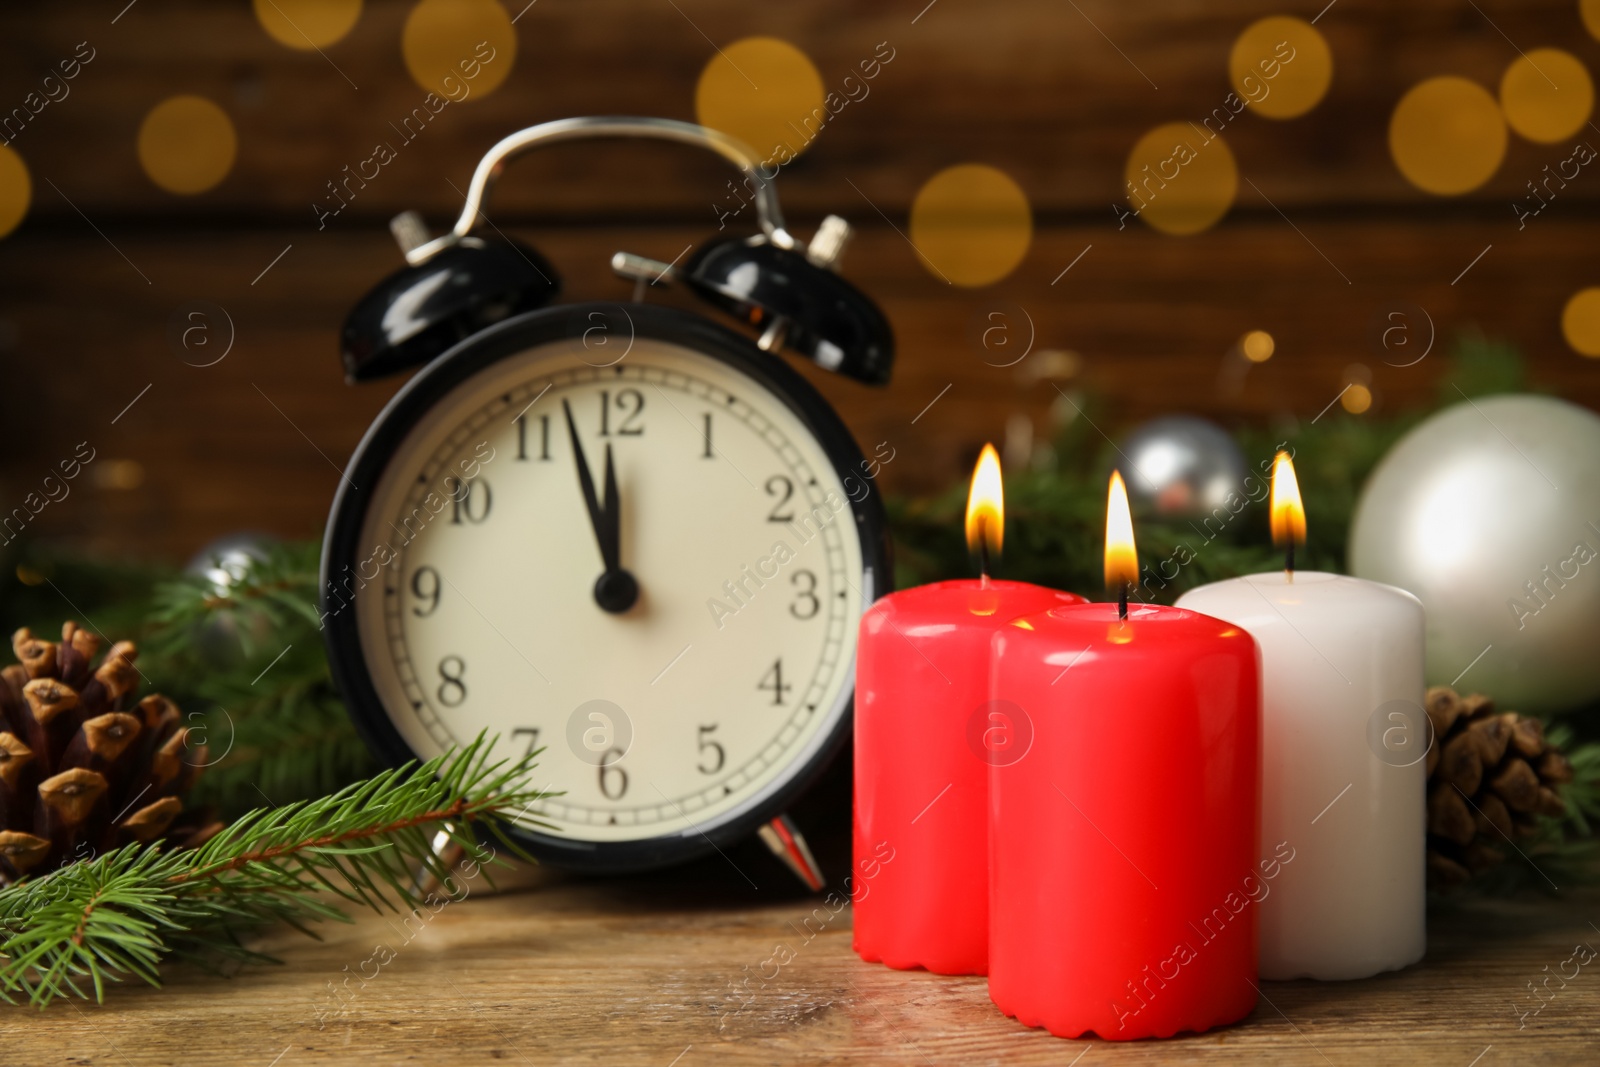 Photo of Alarm clock, burning candles and Christmas decor on wooden table, bokeh effect